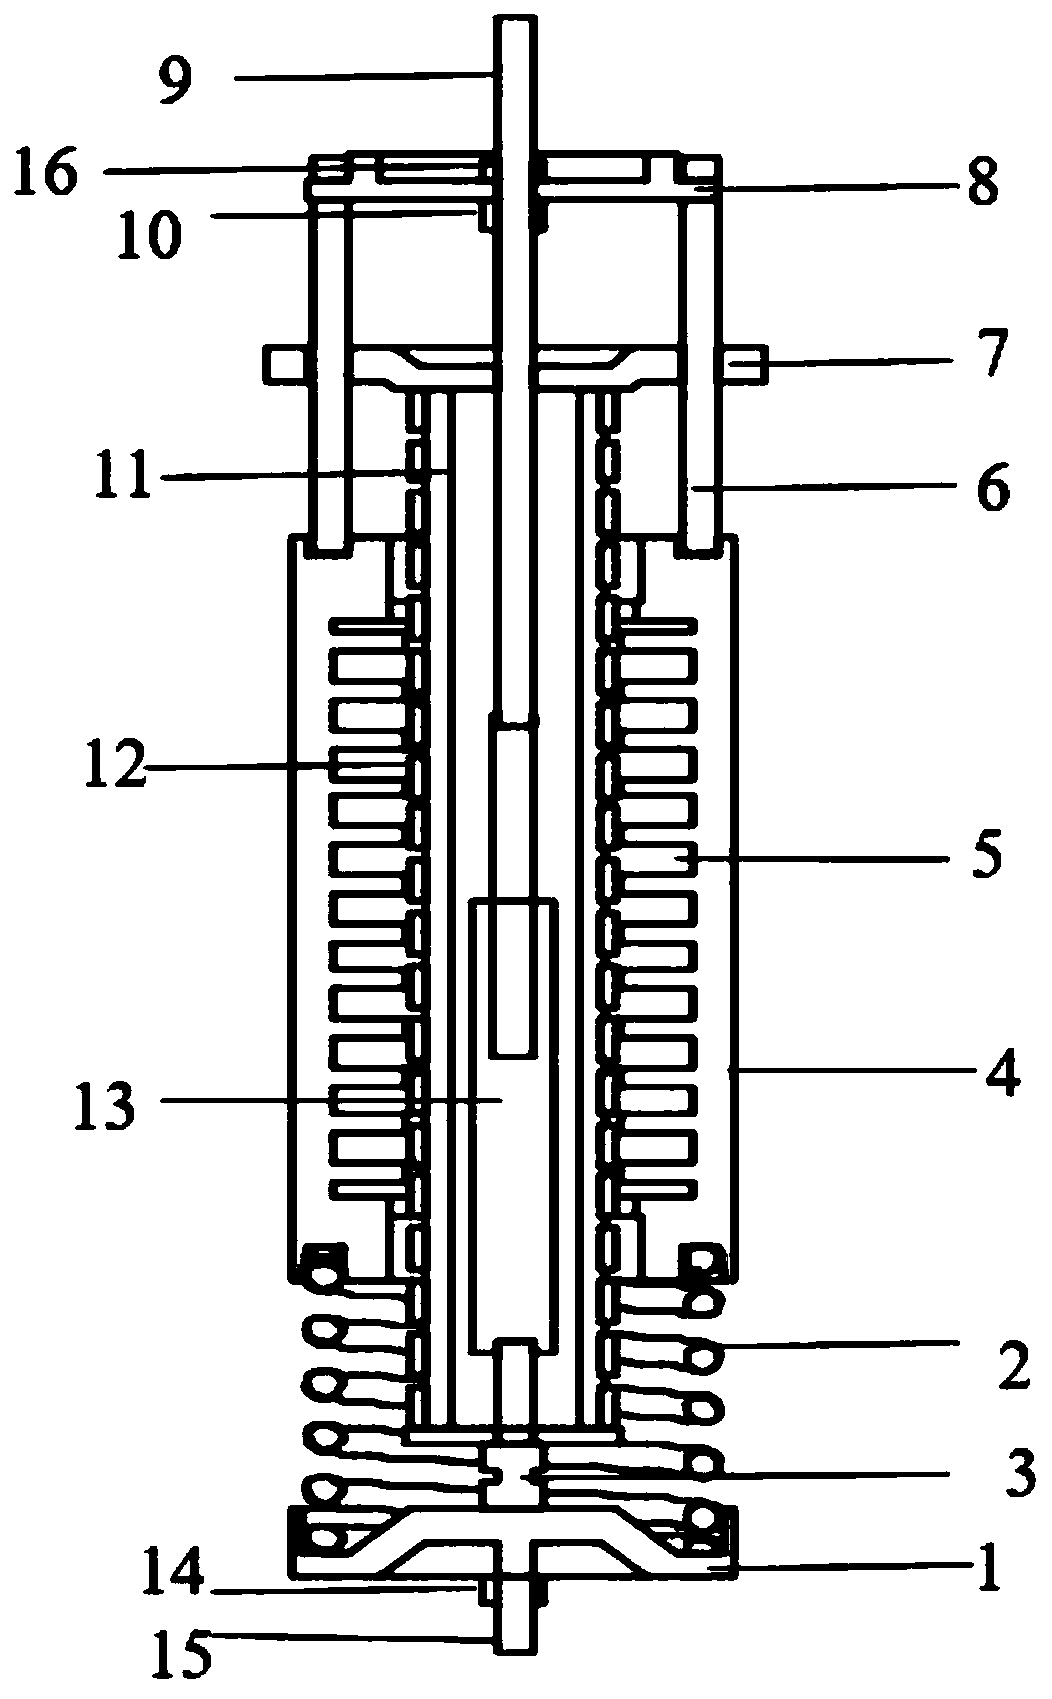 Integrated type electromagnetic shock absorber